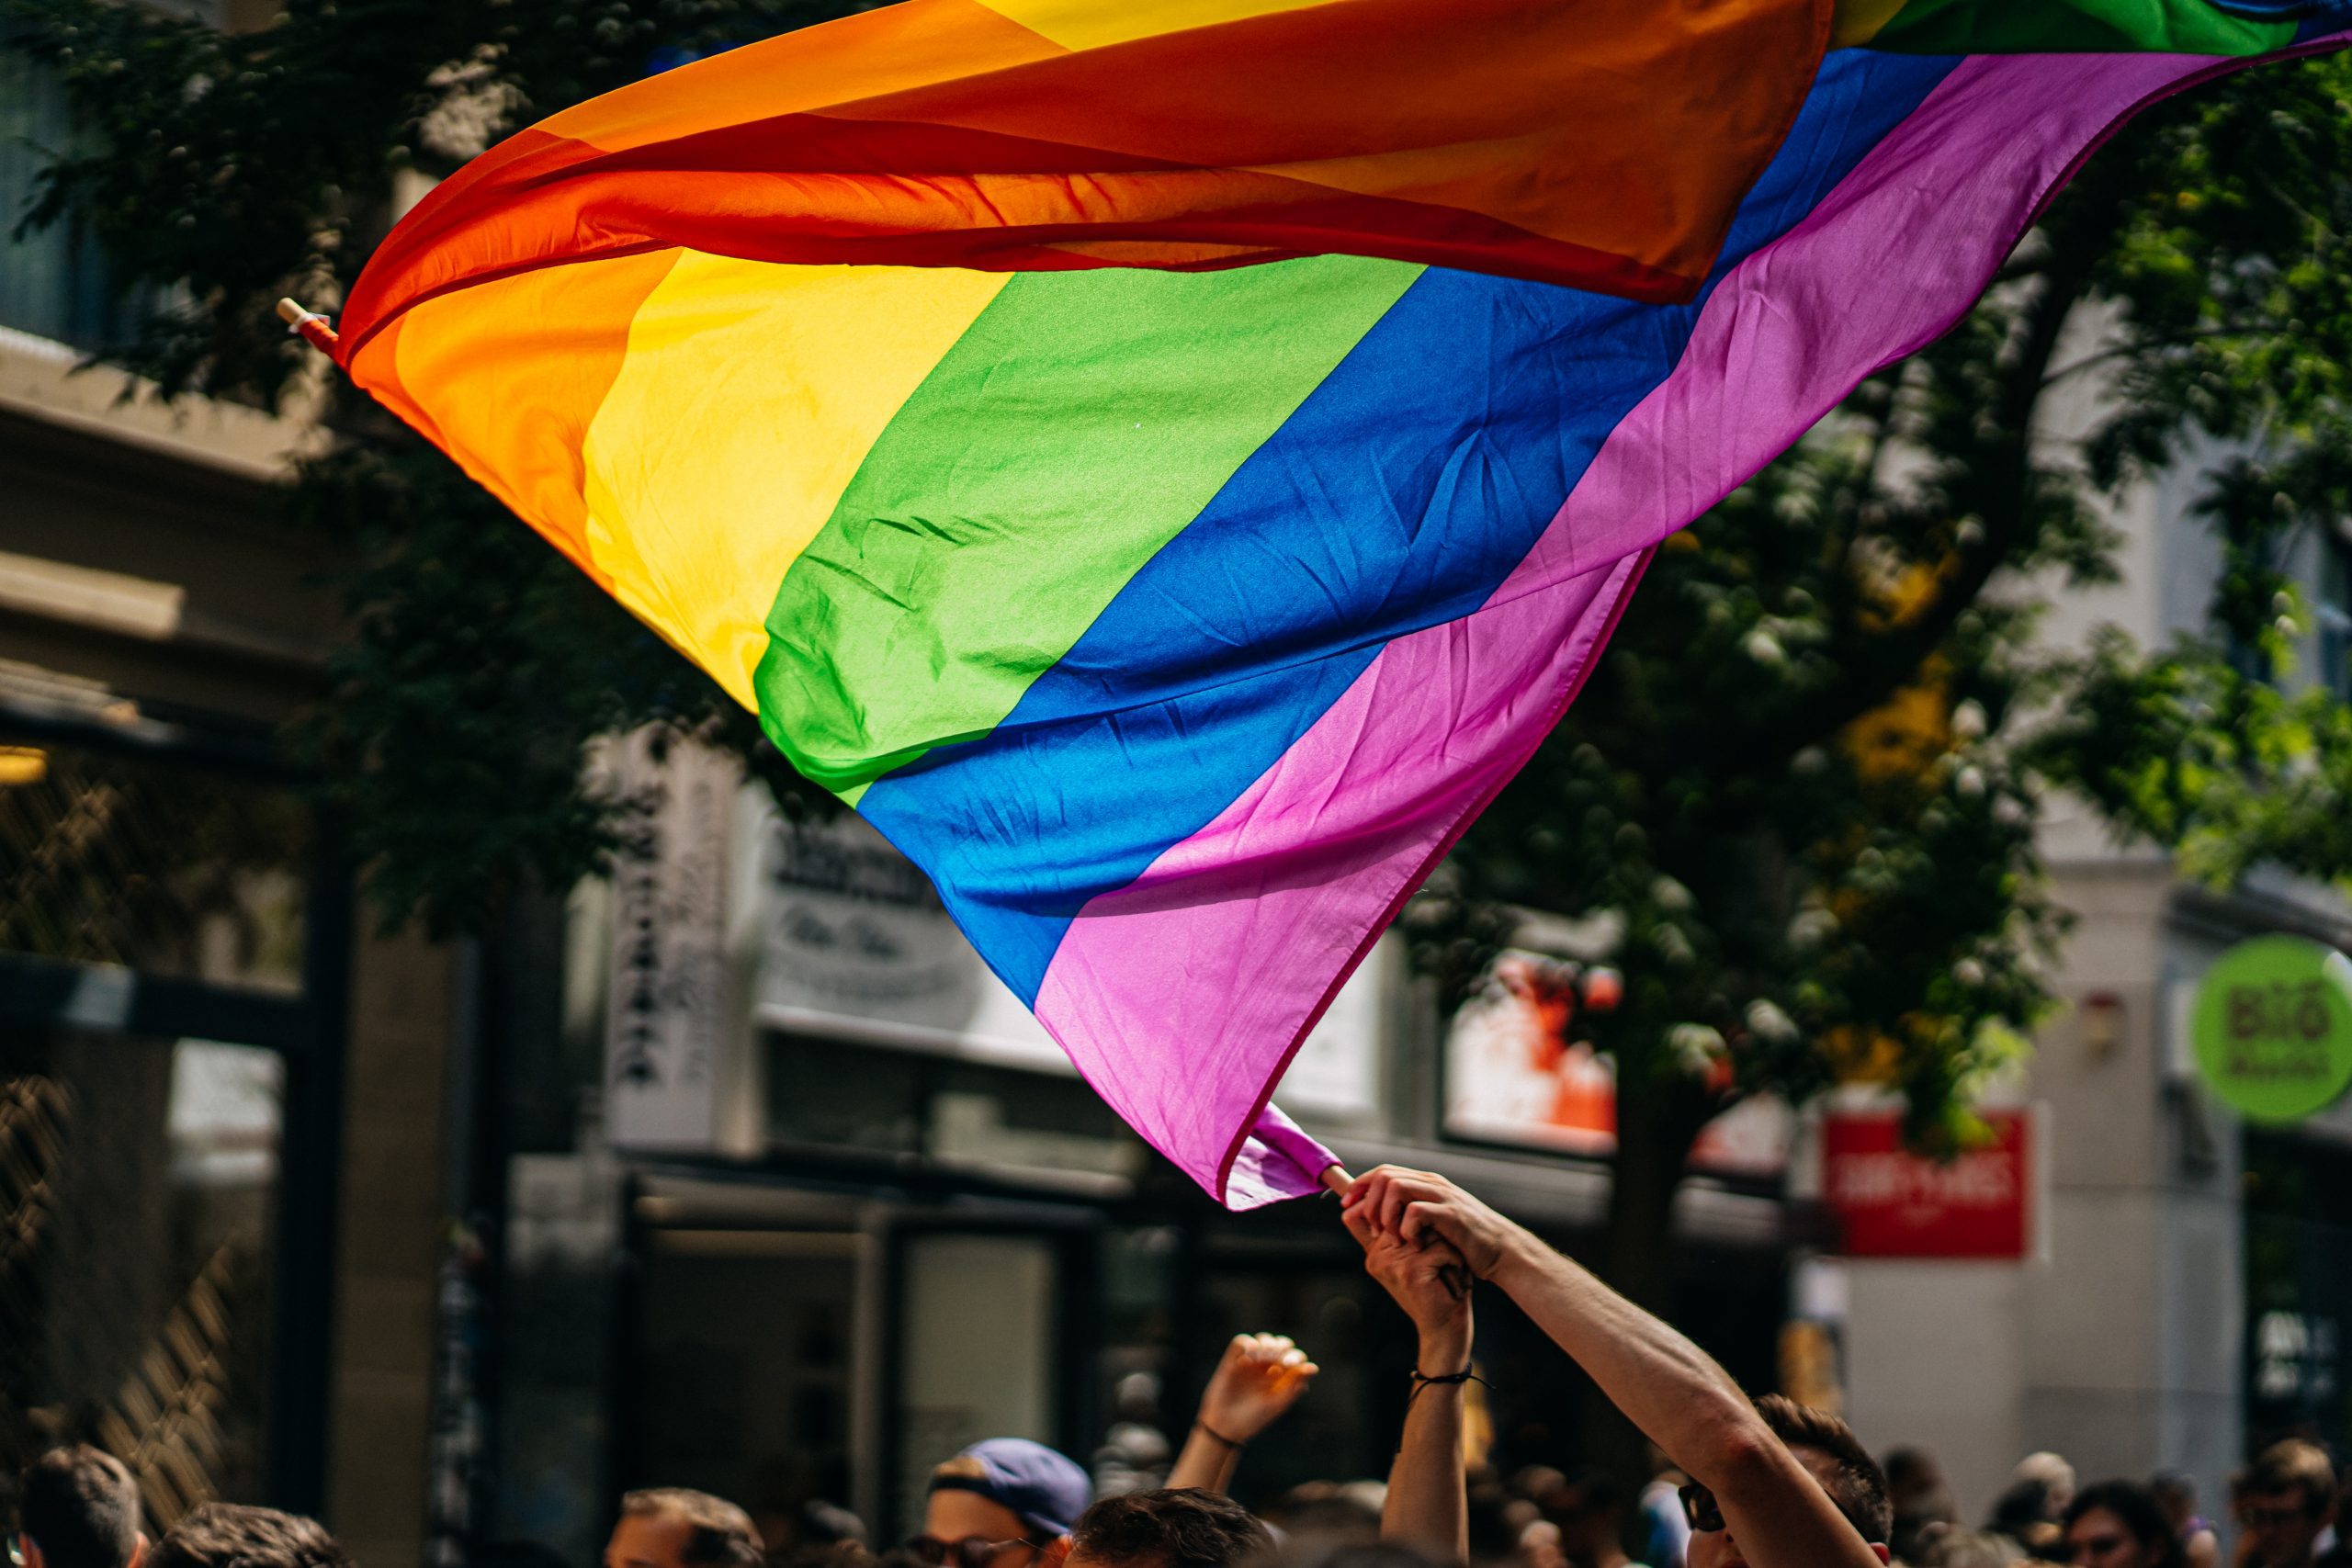 Boston pride events and activities